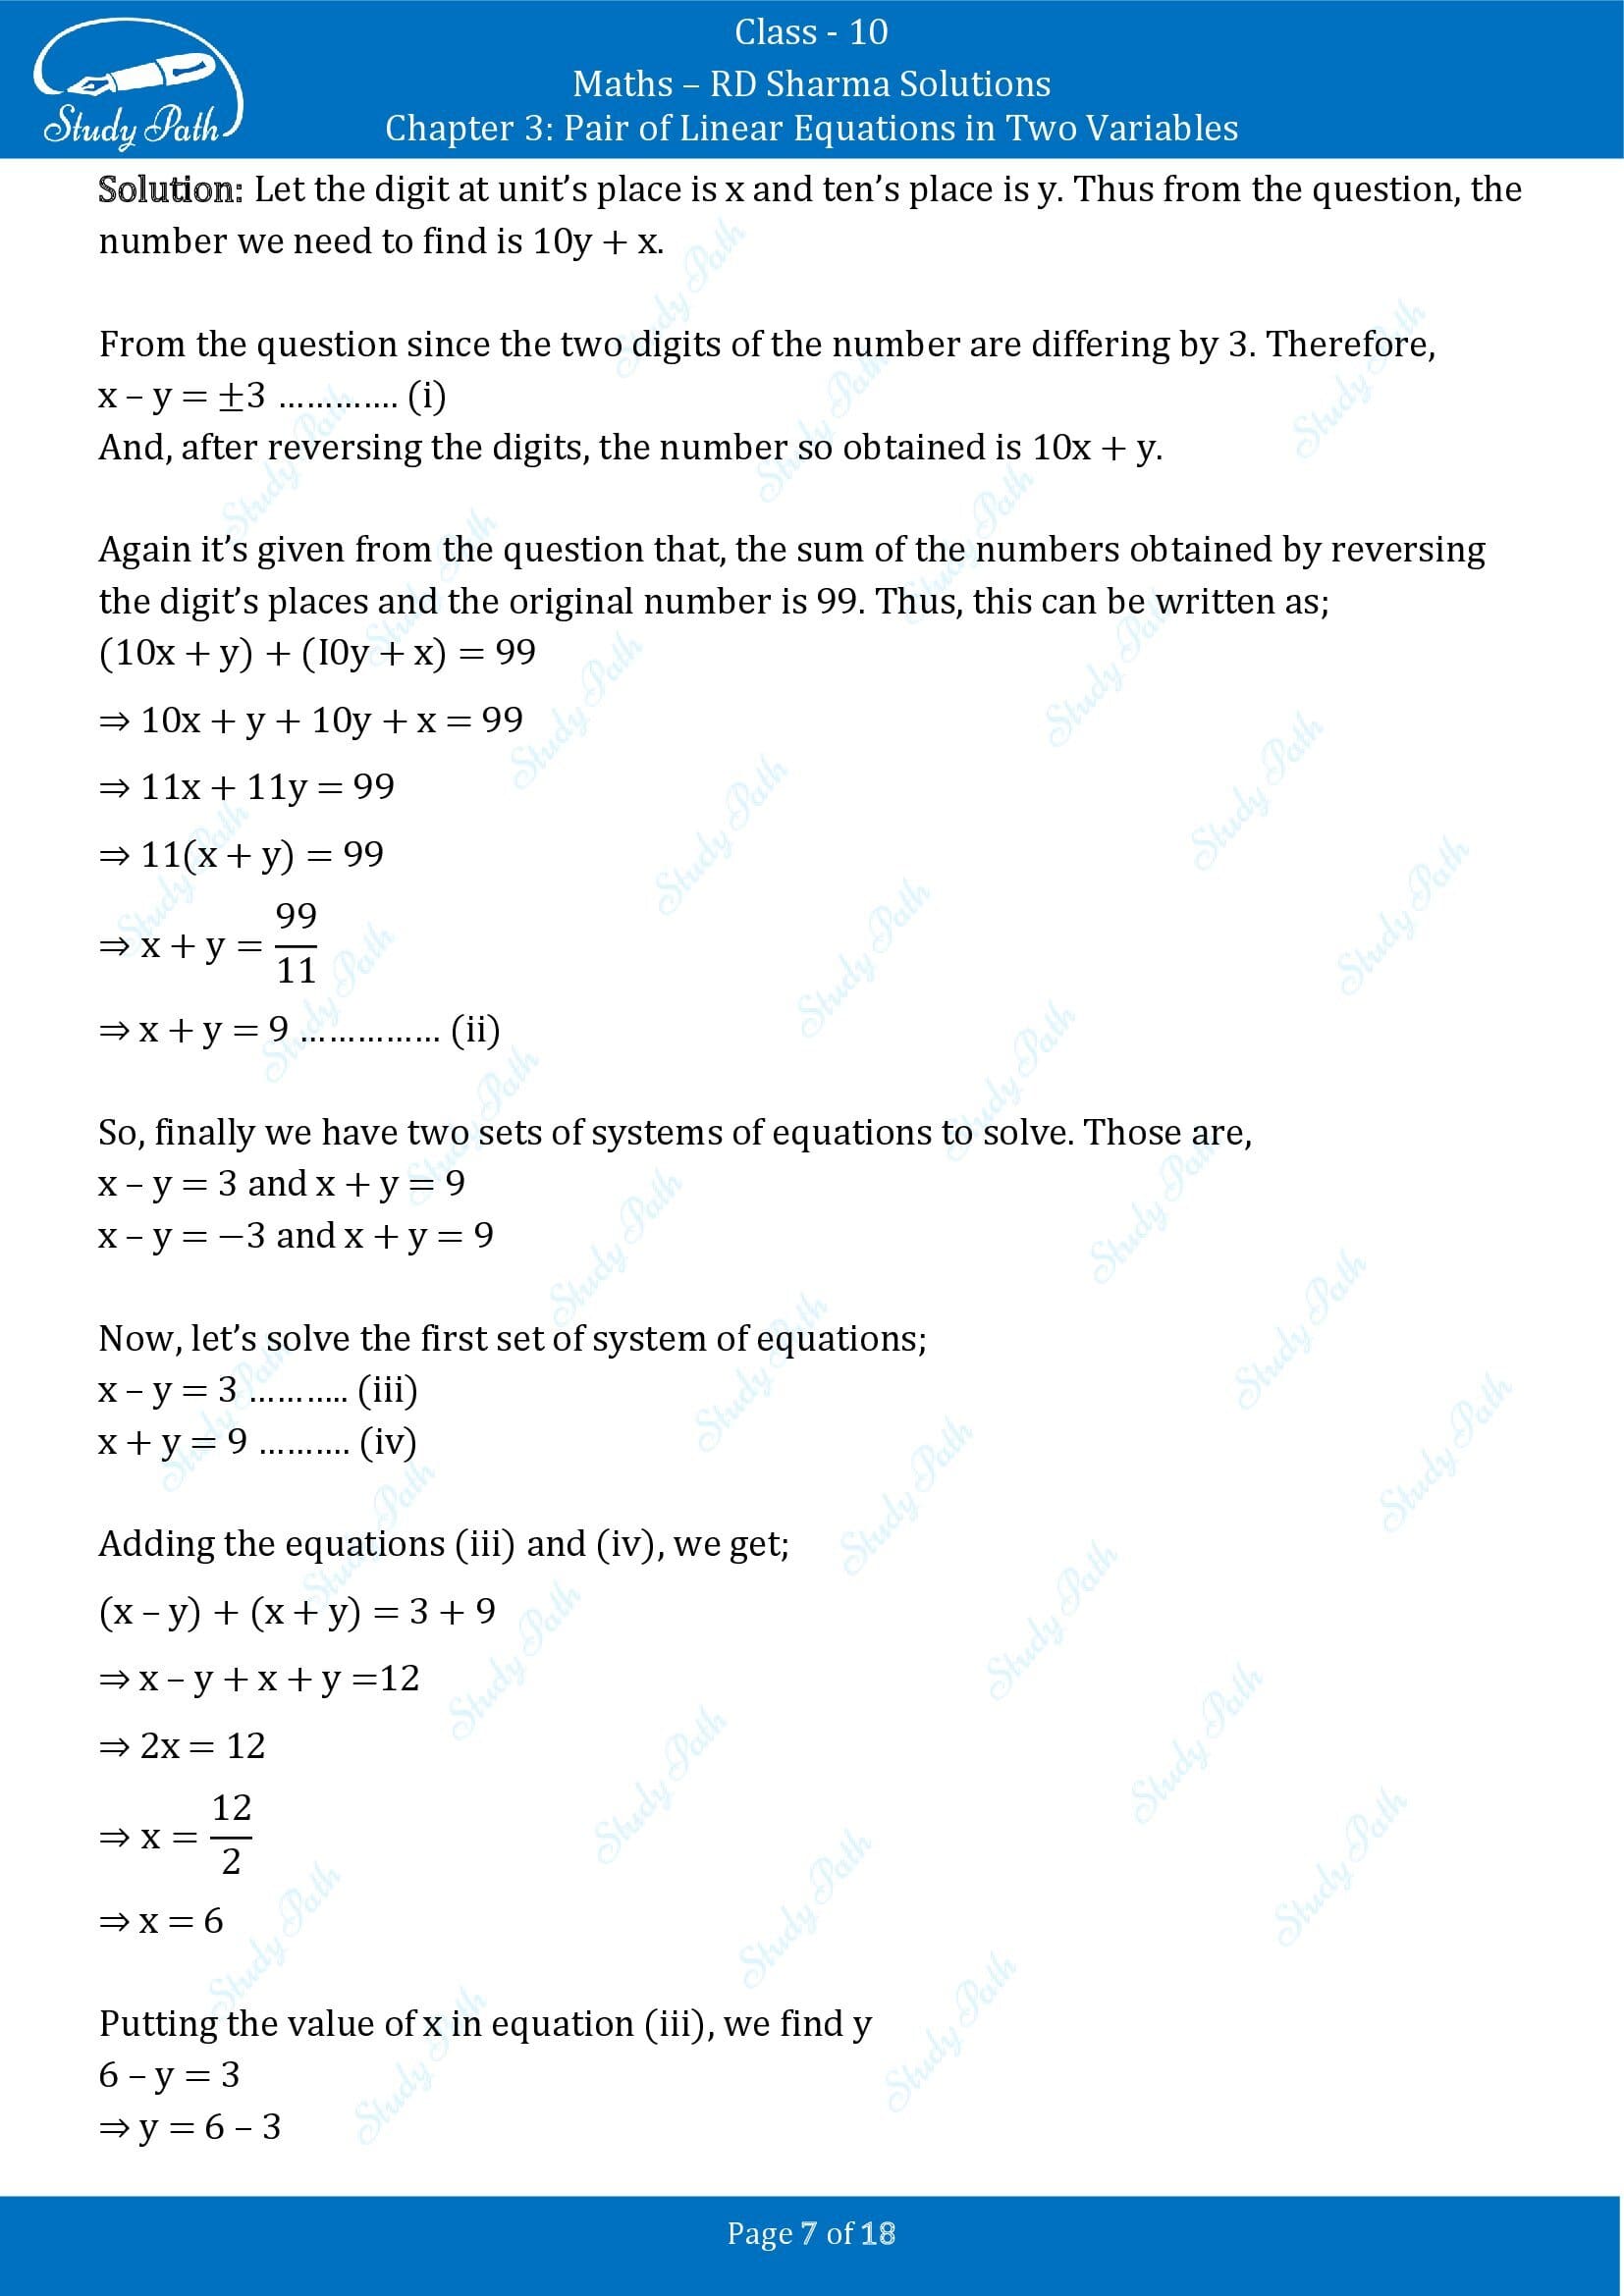 RD Sharma Solutions Class 10 Chapter 3 Pair of Linear Equations in Two Variables Exercise 3.7 00007